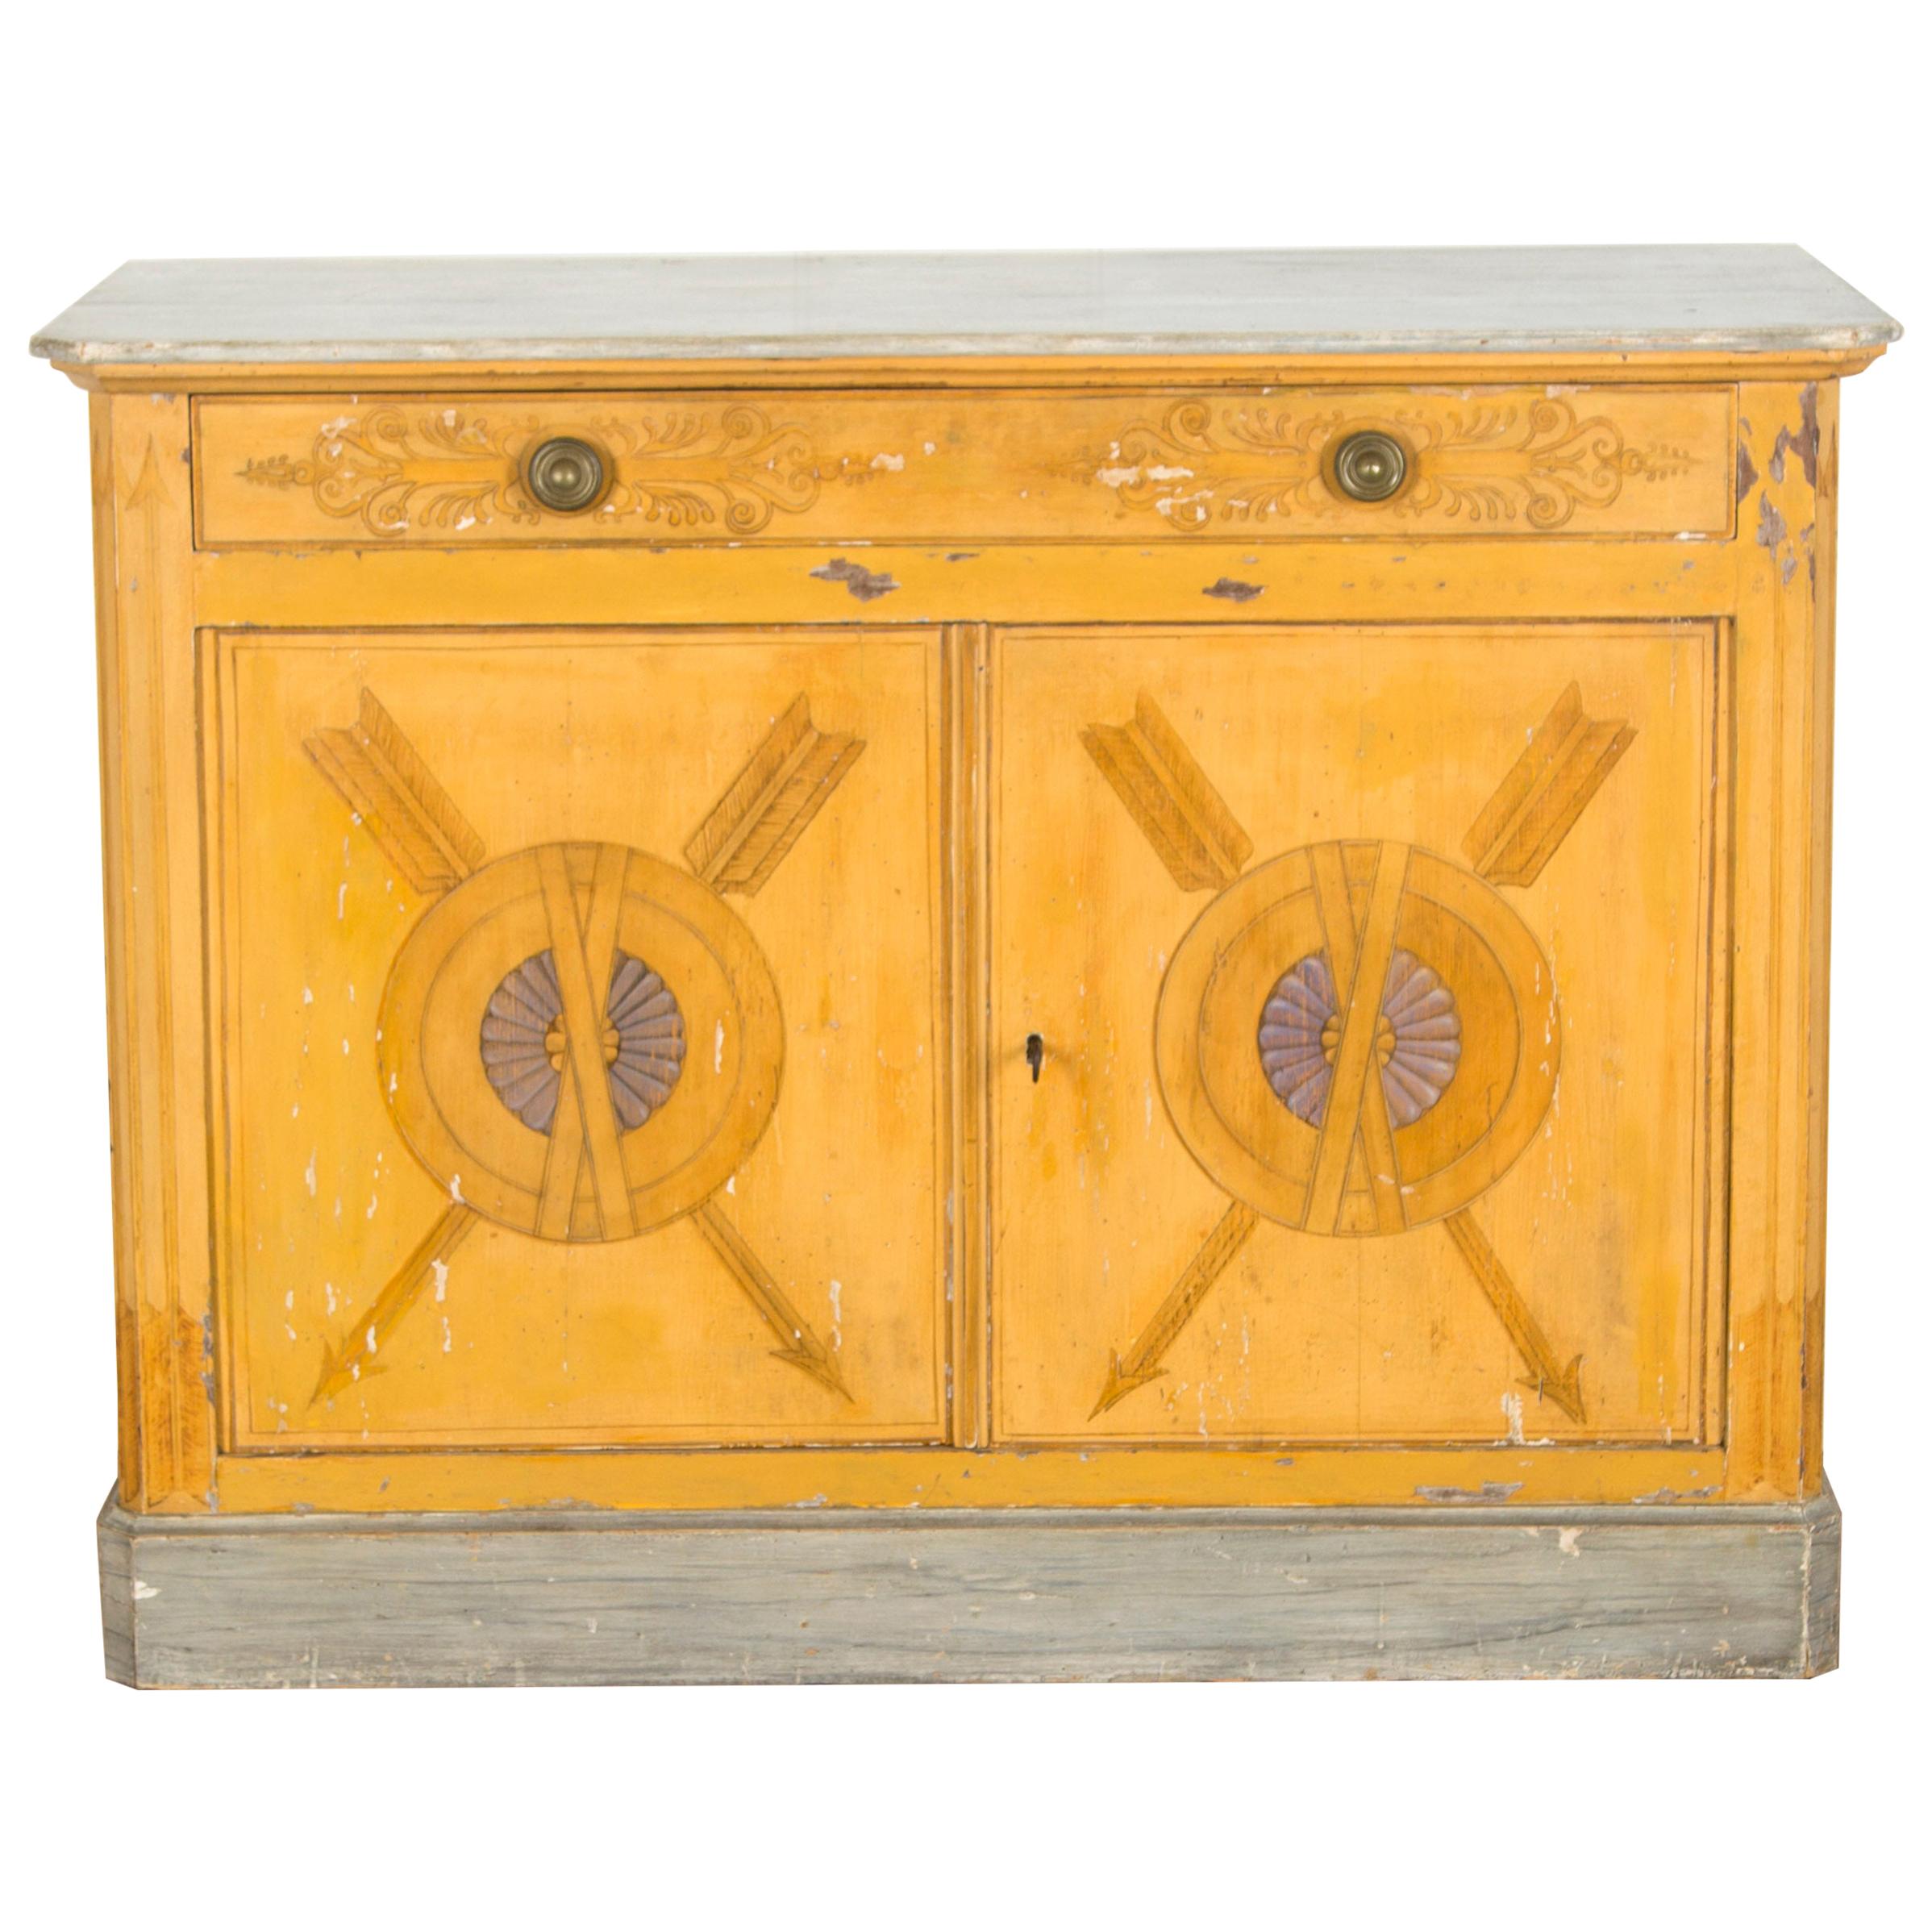 19th Century French Decorated Cabinet